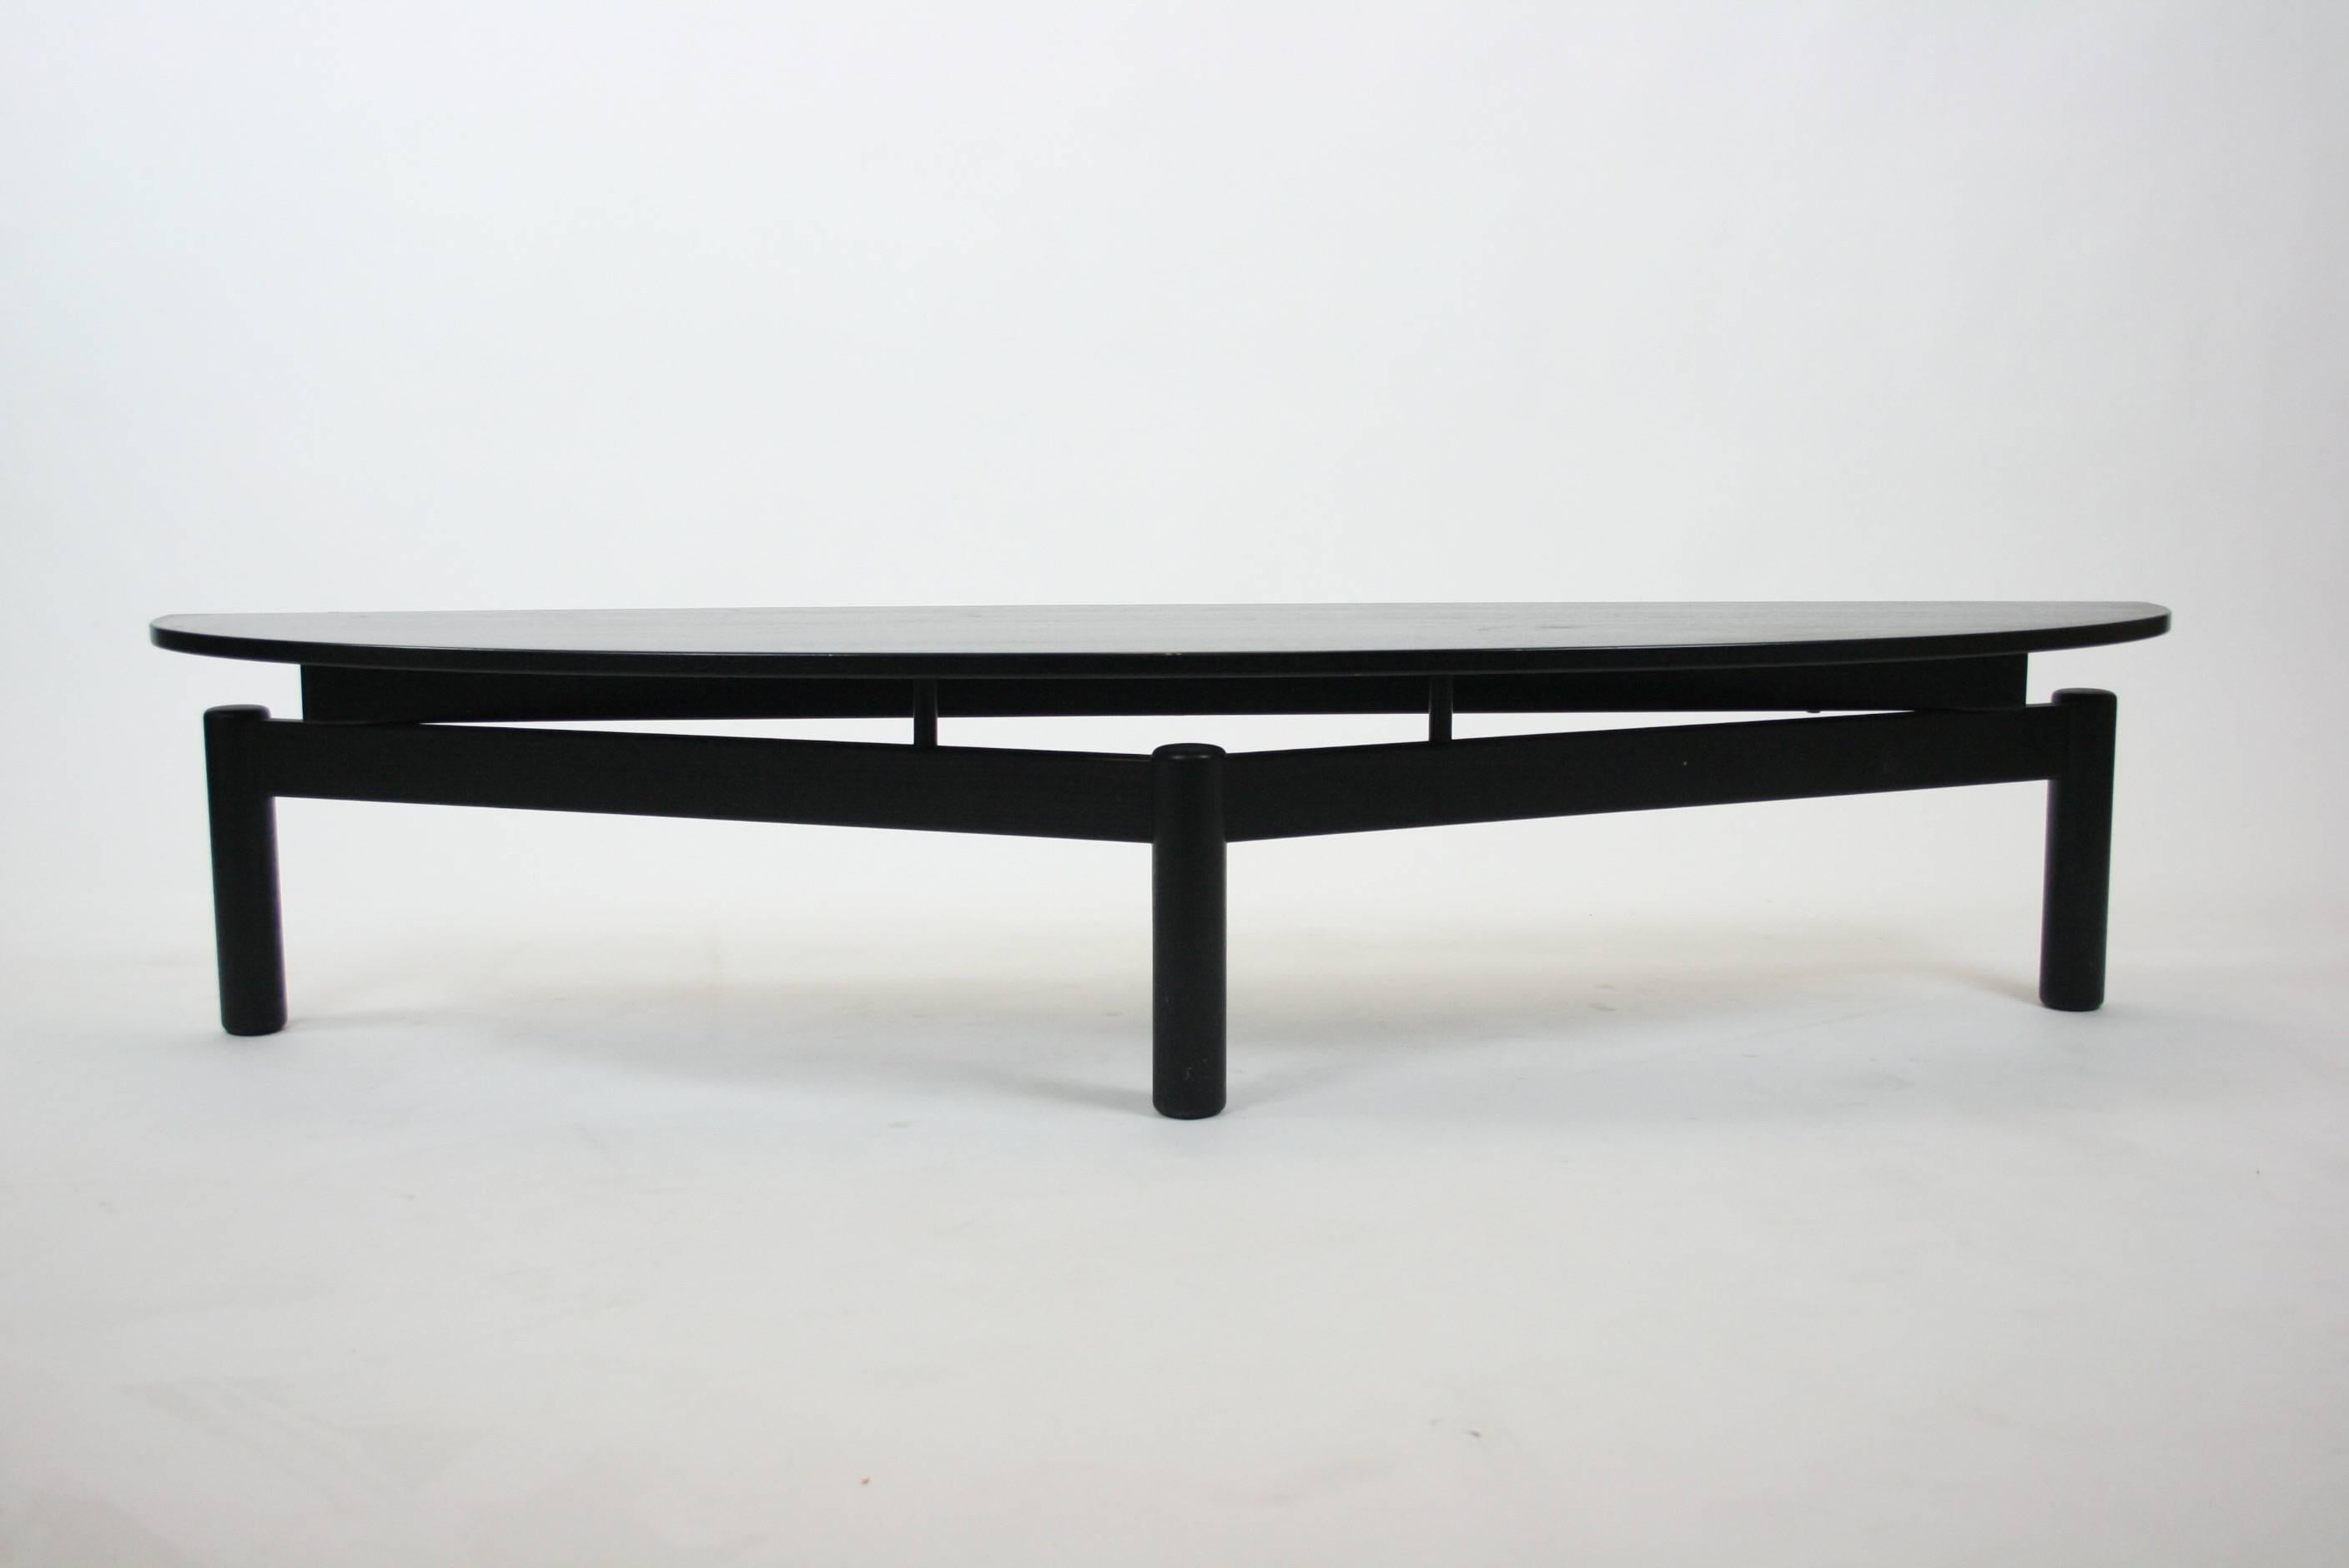 Vico Magistretti Sinbad coffee table for Cassina designed in 1981.
The table has a beautiful ebonized finish with a long and sleek profile. 

The table is in very good original condition and fully labeled.